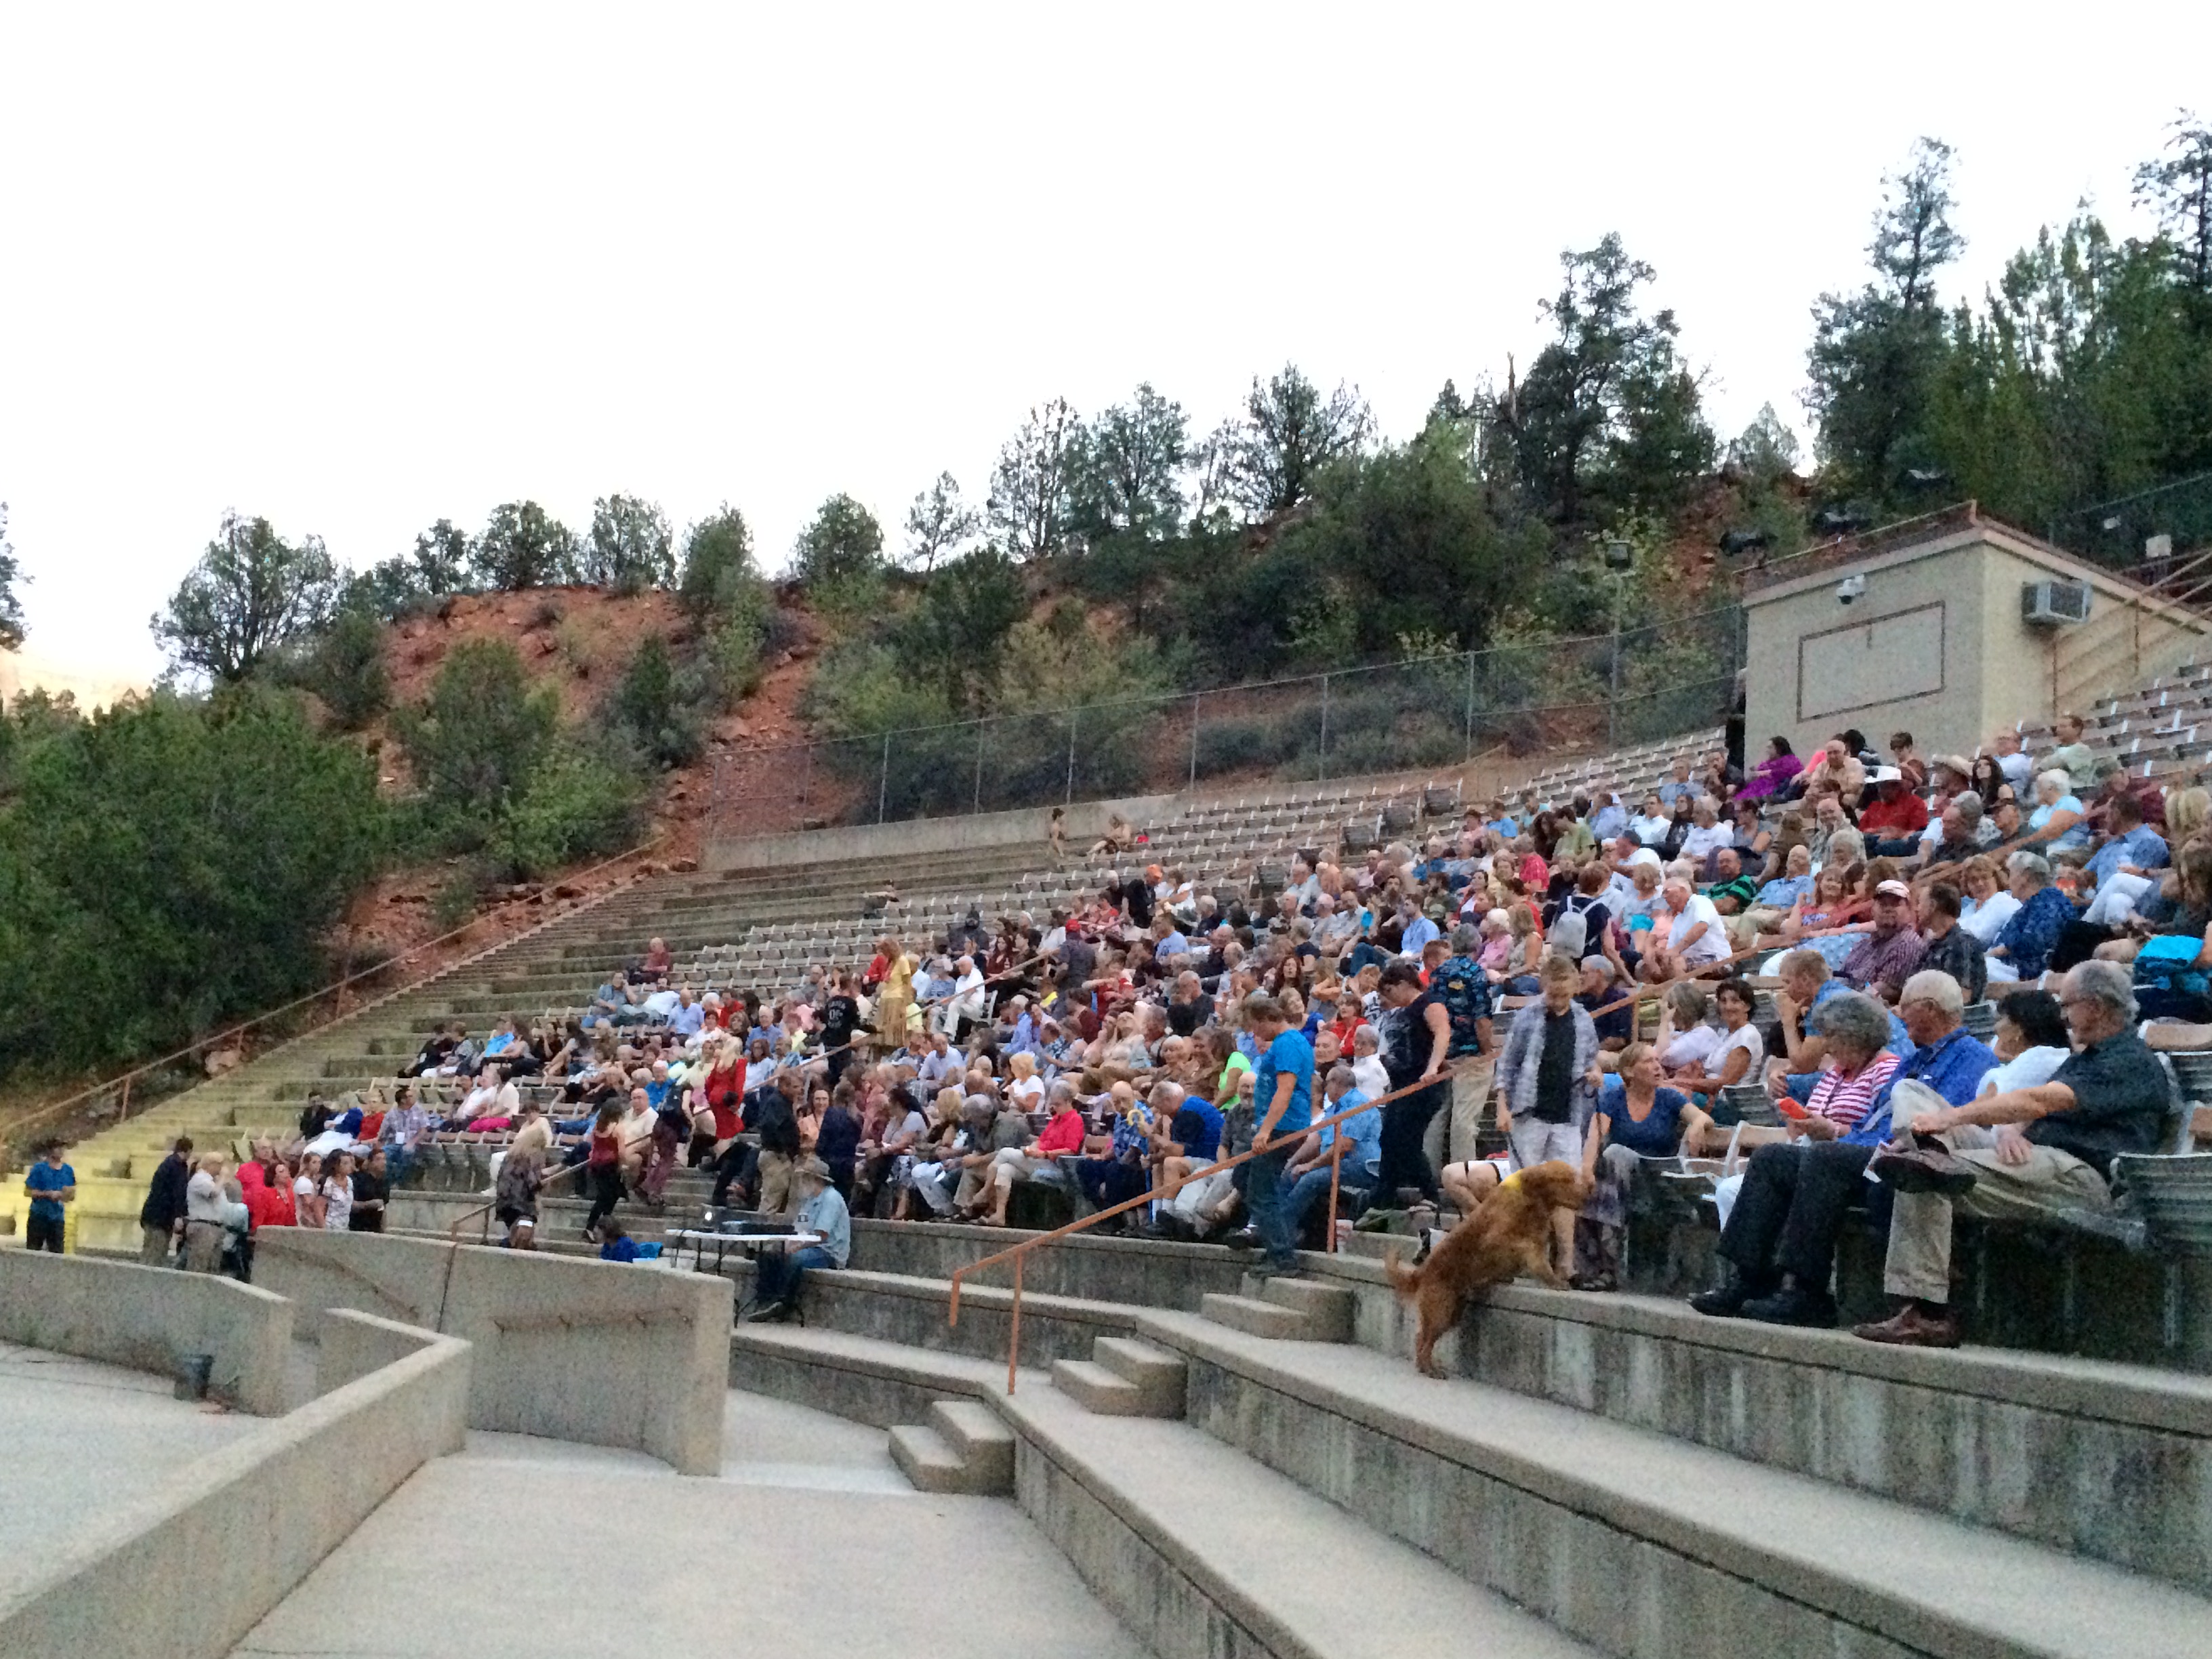 Flood damage closes O.C. Tanner Amphitheater for 6-8 months; Zion